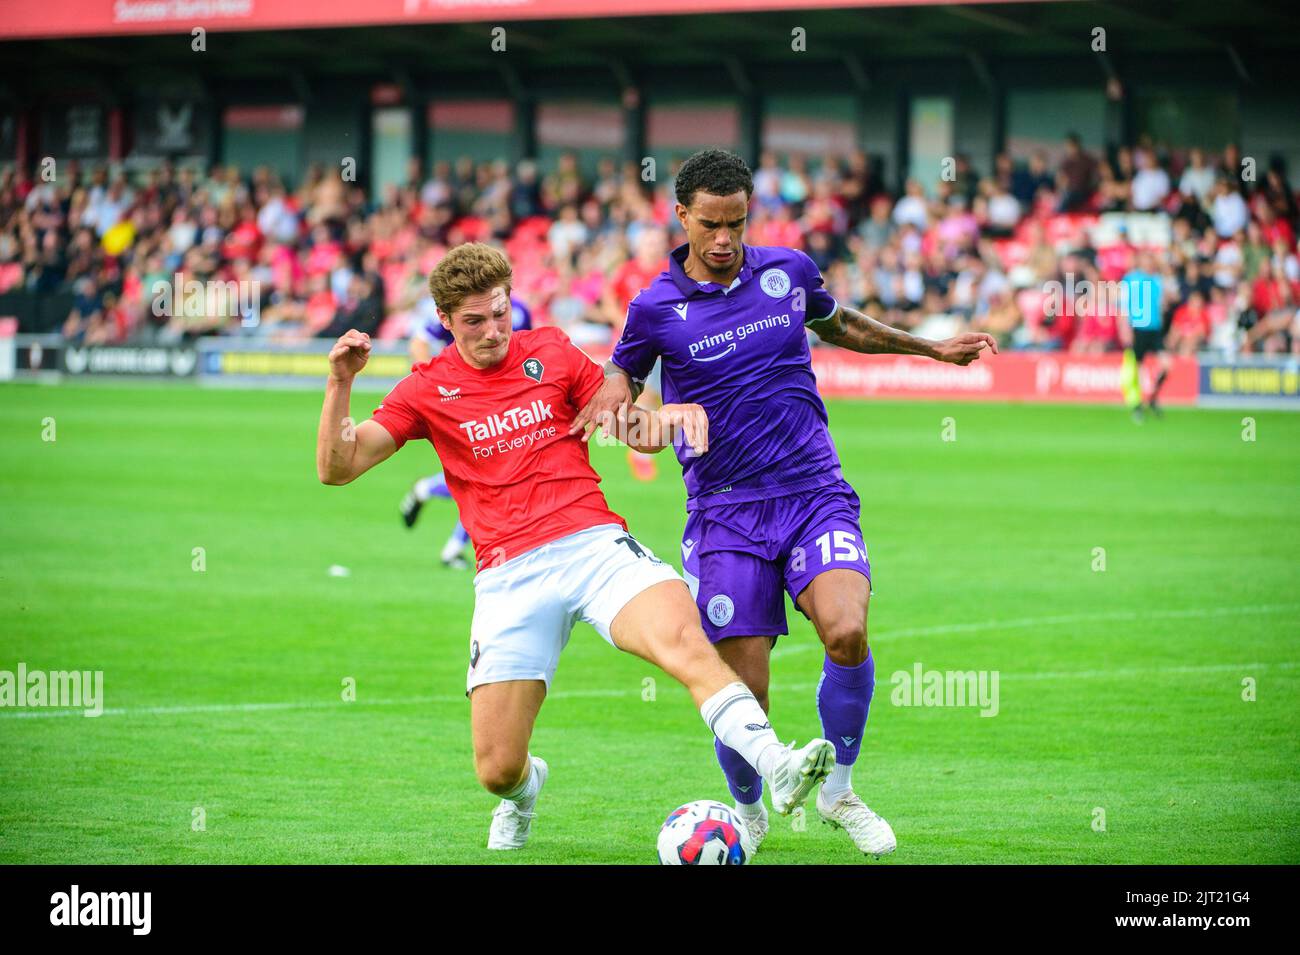 Lorent Tolaj of Salford City tackles Terence Vancooten of Stevenage FC during the Sky Bet League 2 match between Salford City and Stevenage at Moor Lane, Salford on Saturday 27th August 2022. (Credit: Ian Charles | MI News) Credit: MI News & Sport /Alamy Live News Stock Photo